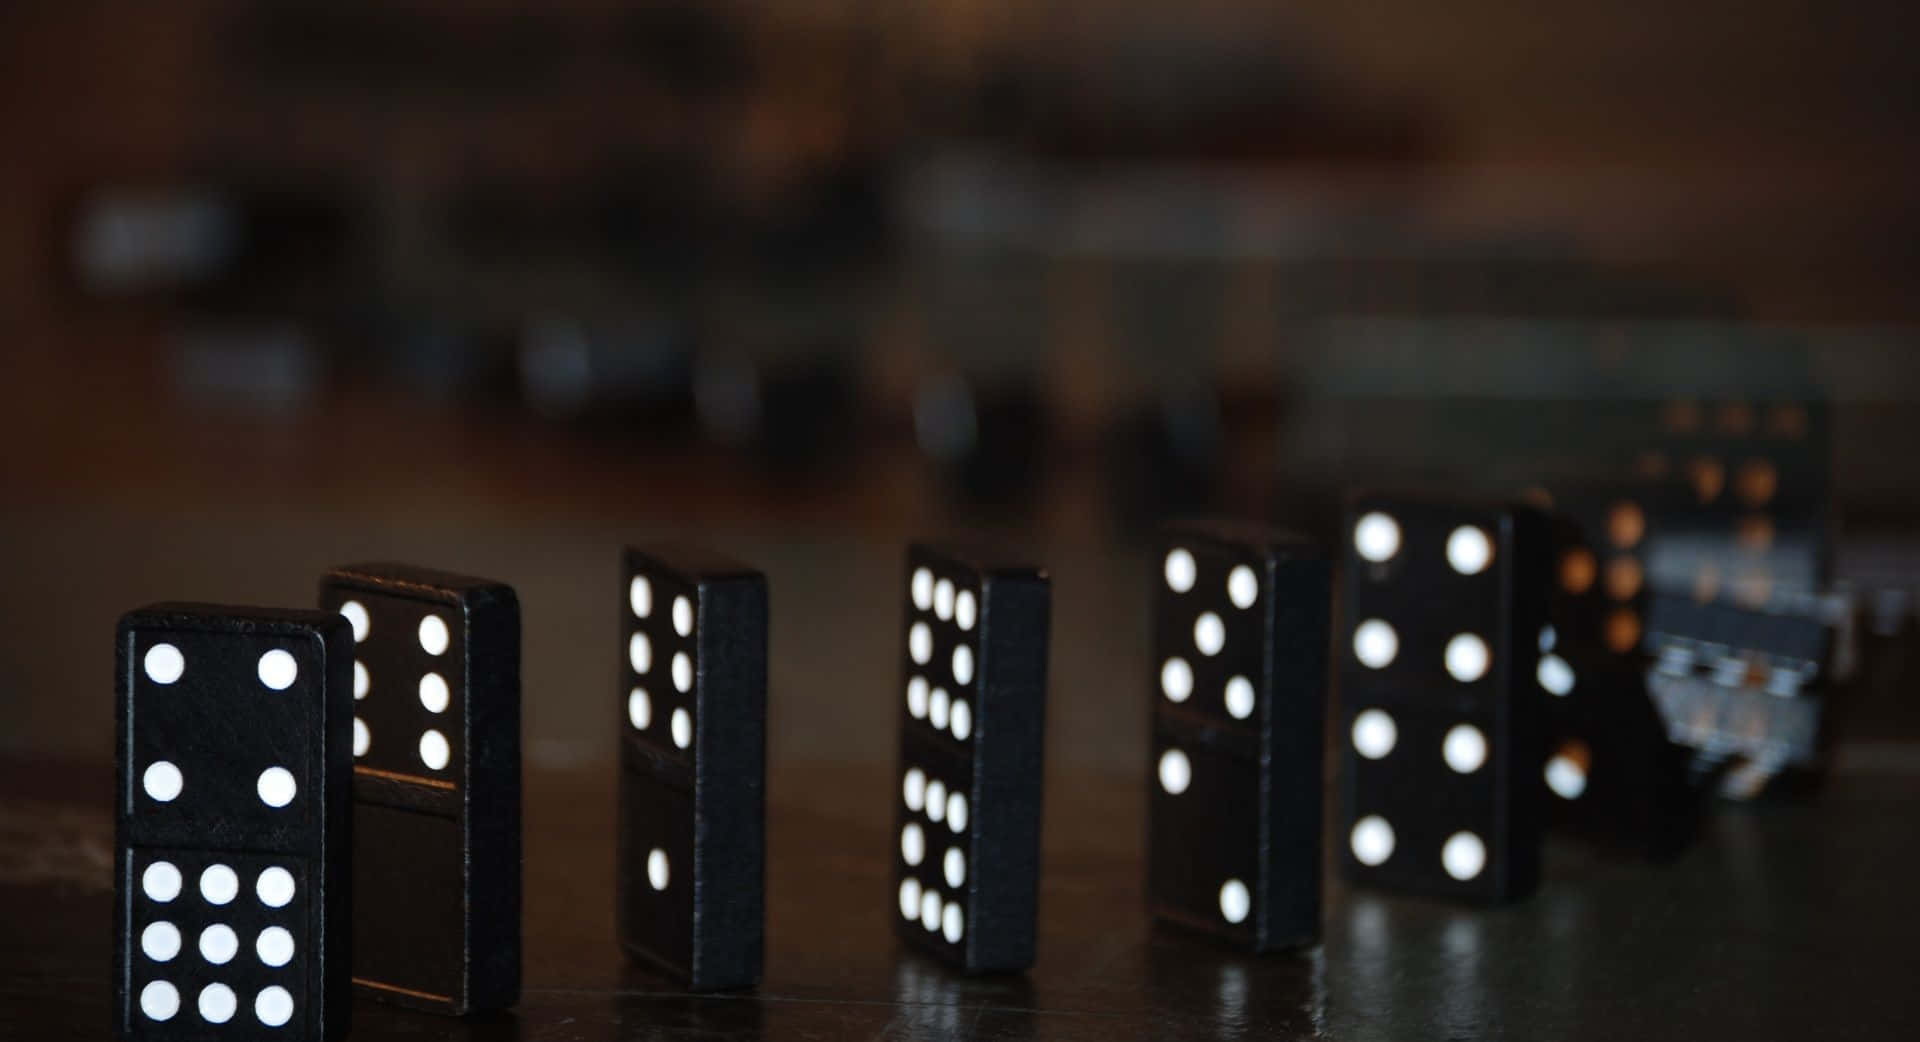 Domino pieces falling in sequence on a black background.